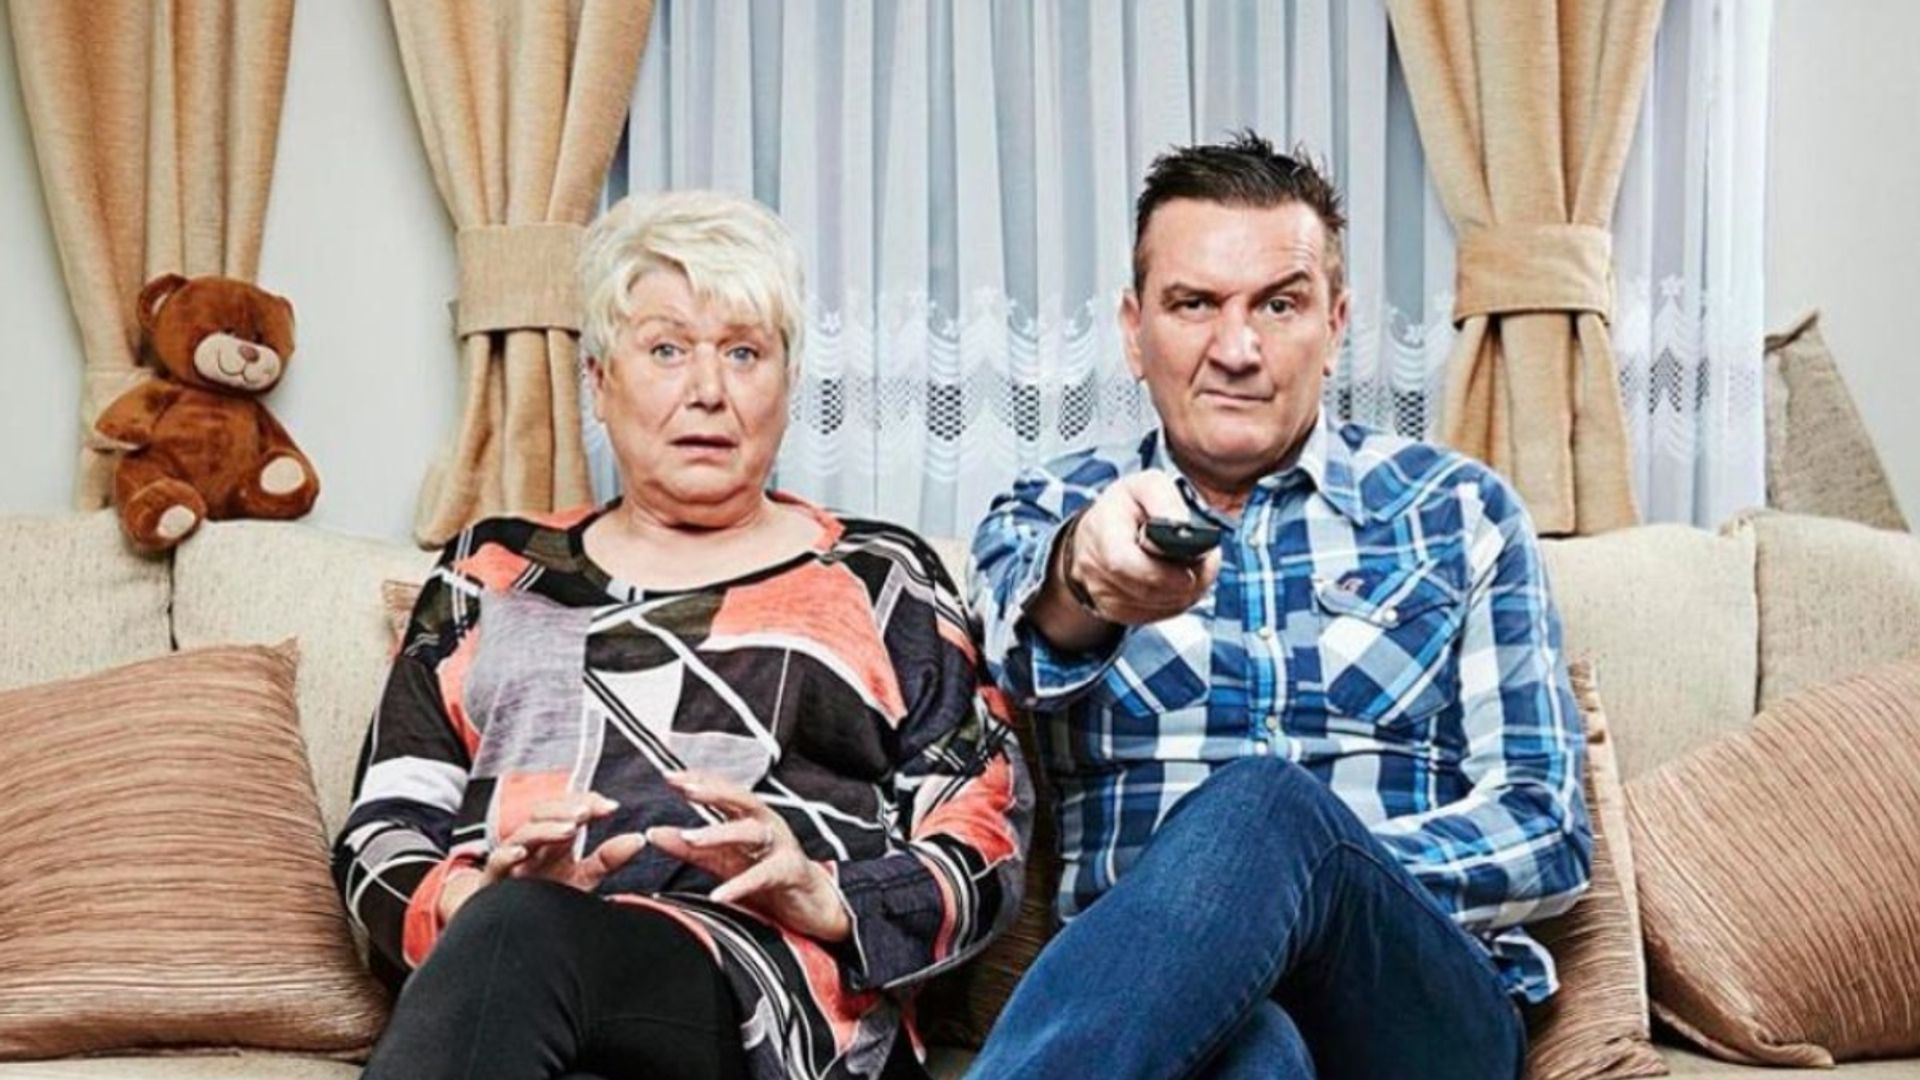 Jenny and Lee on Gogglebox